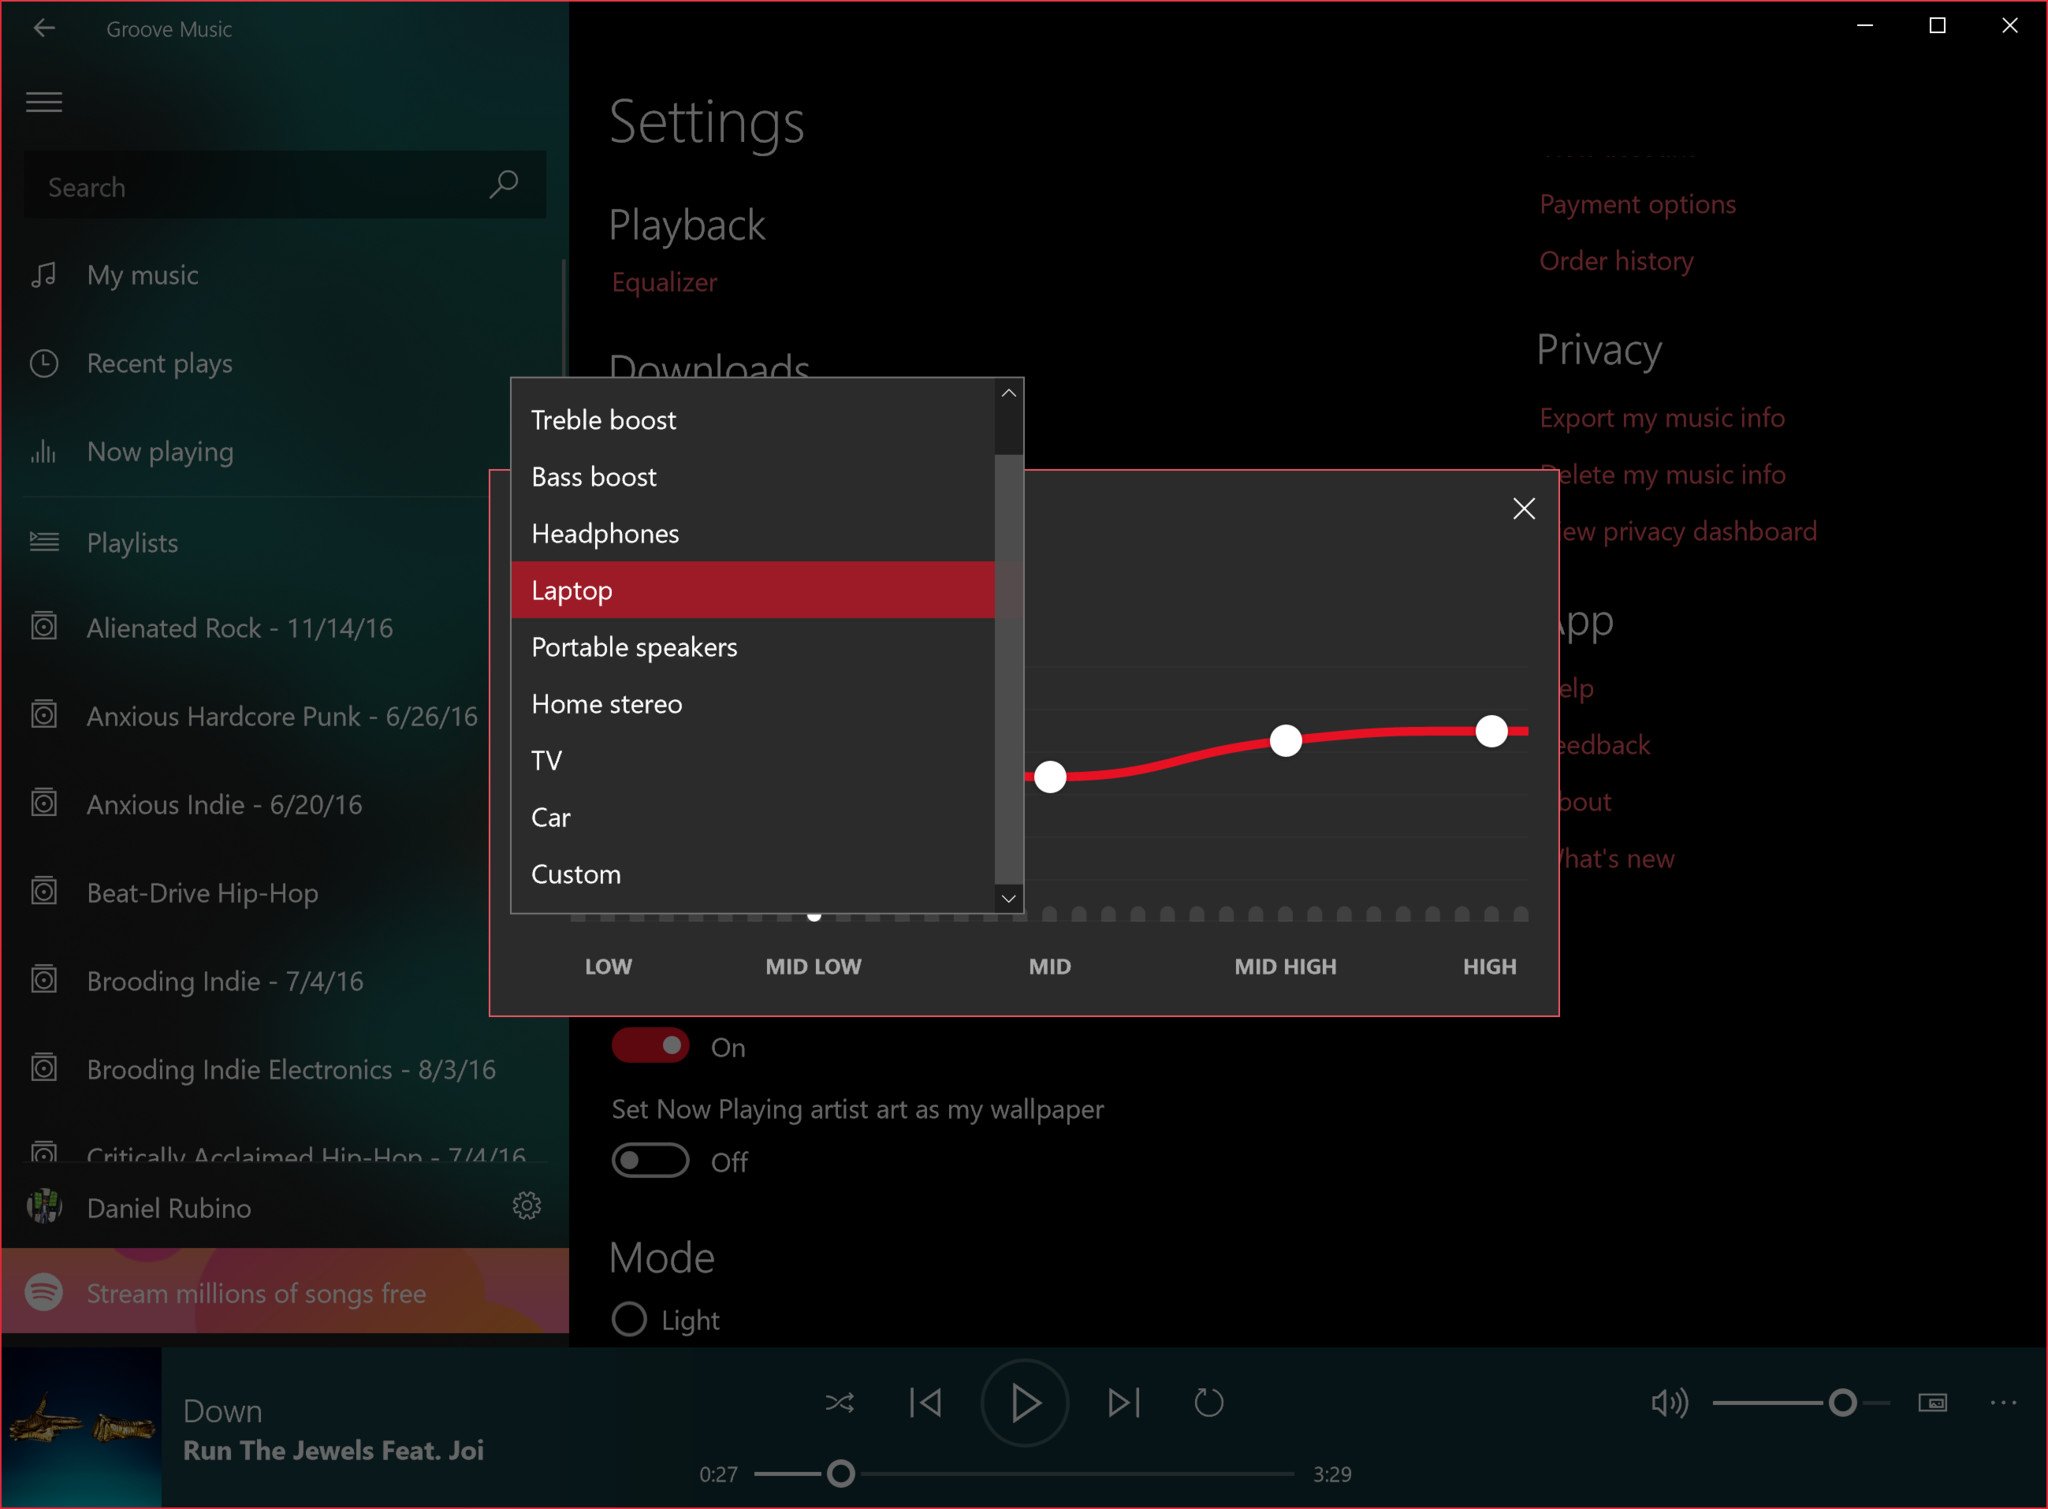 Groove Music Equalizer